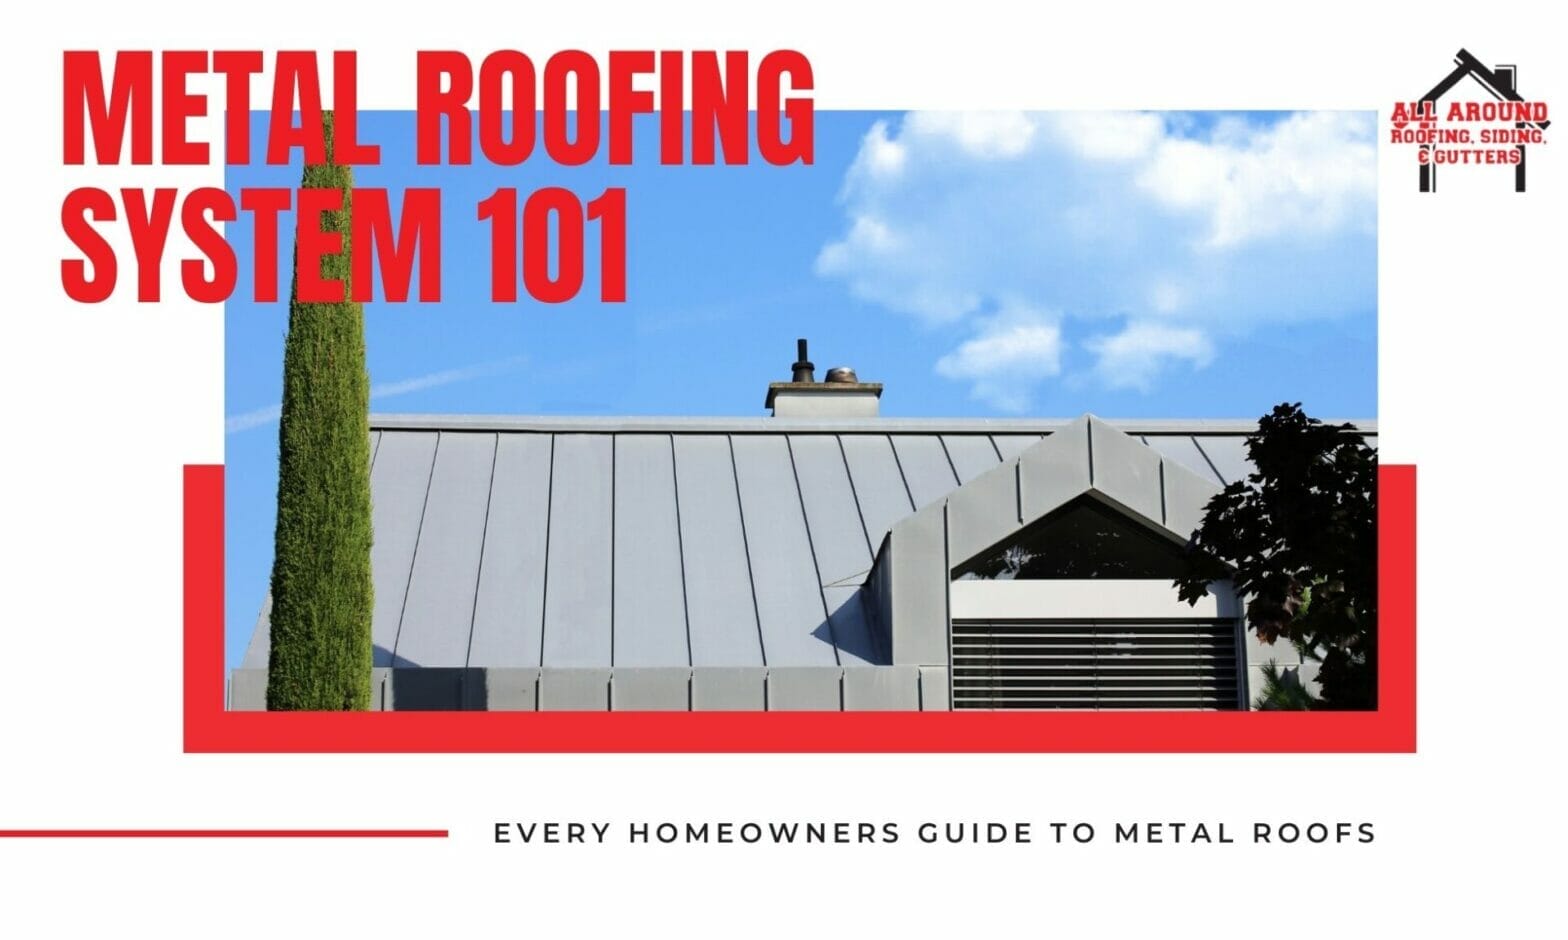 Every Homeowners Guide To Metal Roofing System In Ohio